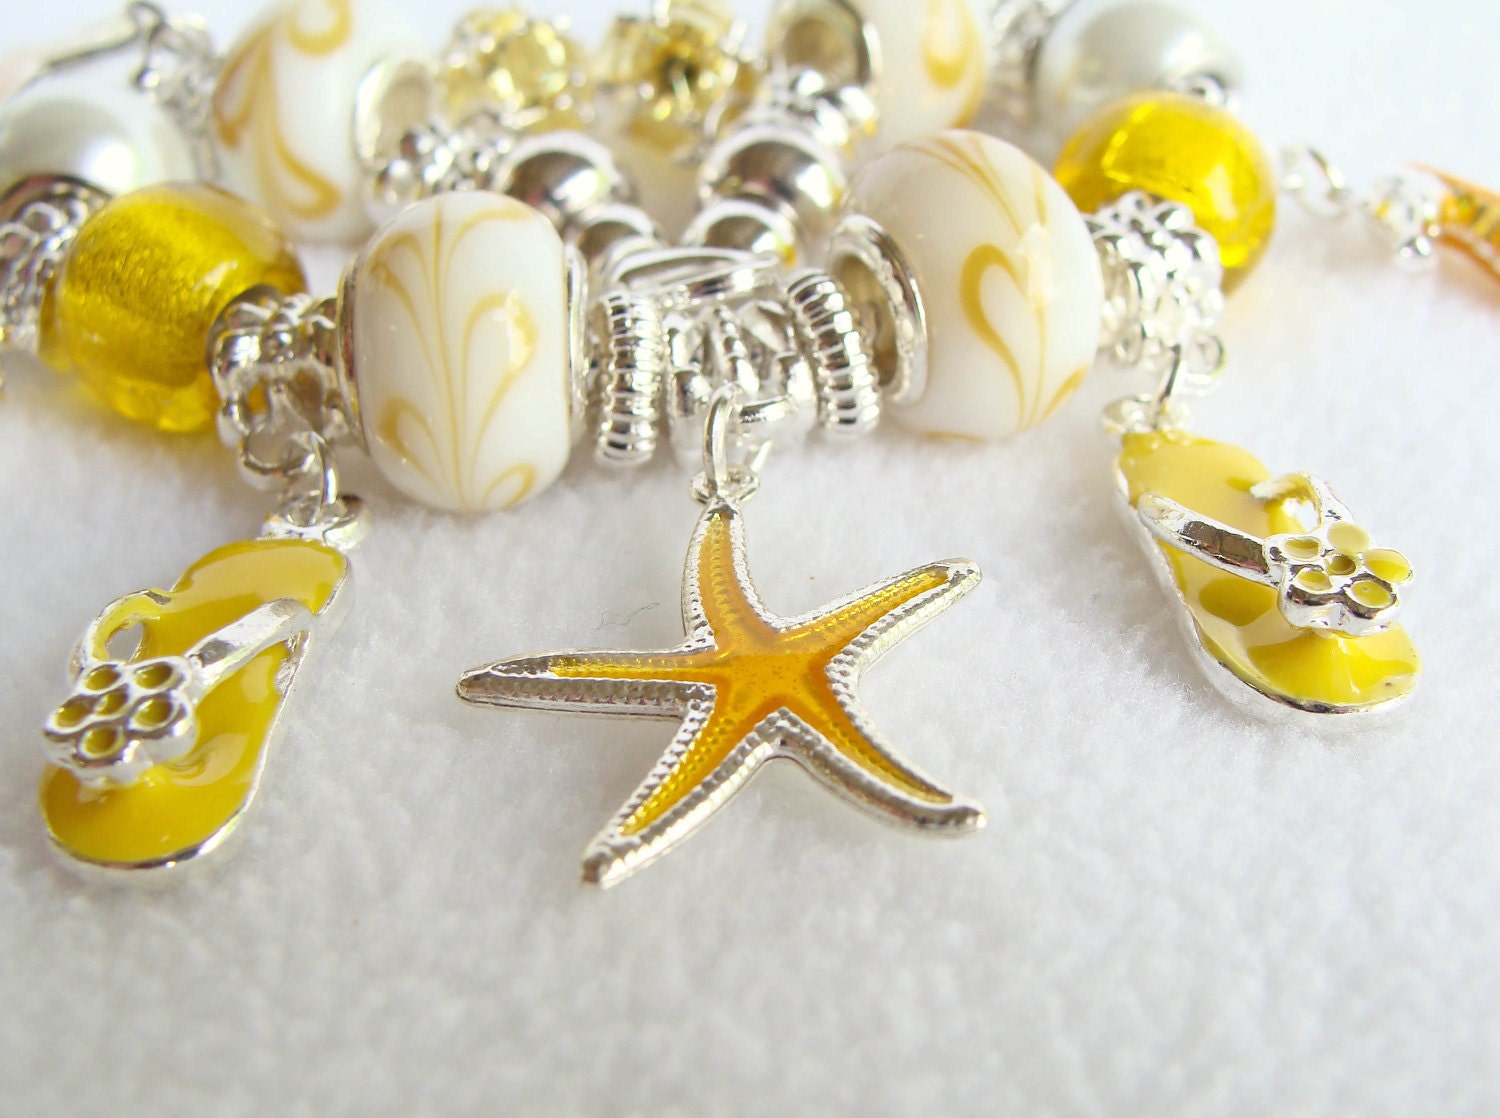 Yellow and White Swirl European Beaded Charm Bracelet with Ocean Charms - GirlieGals